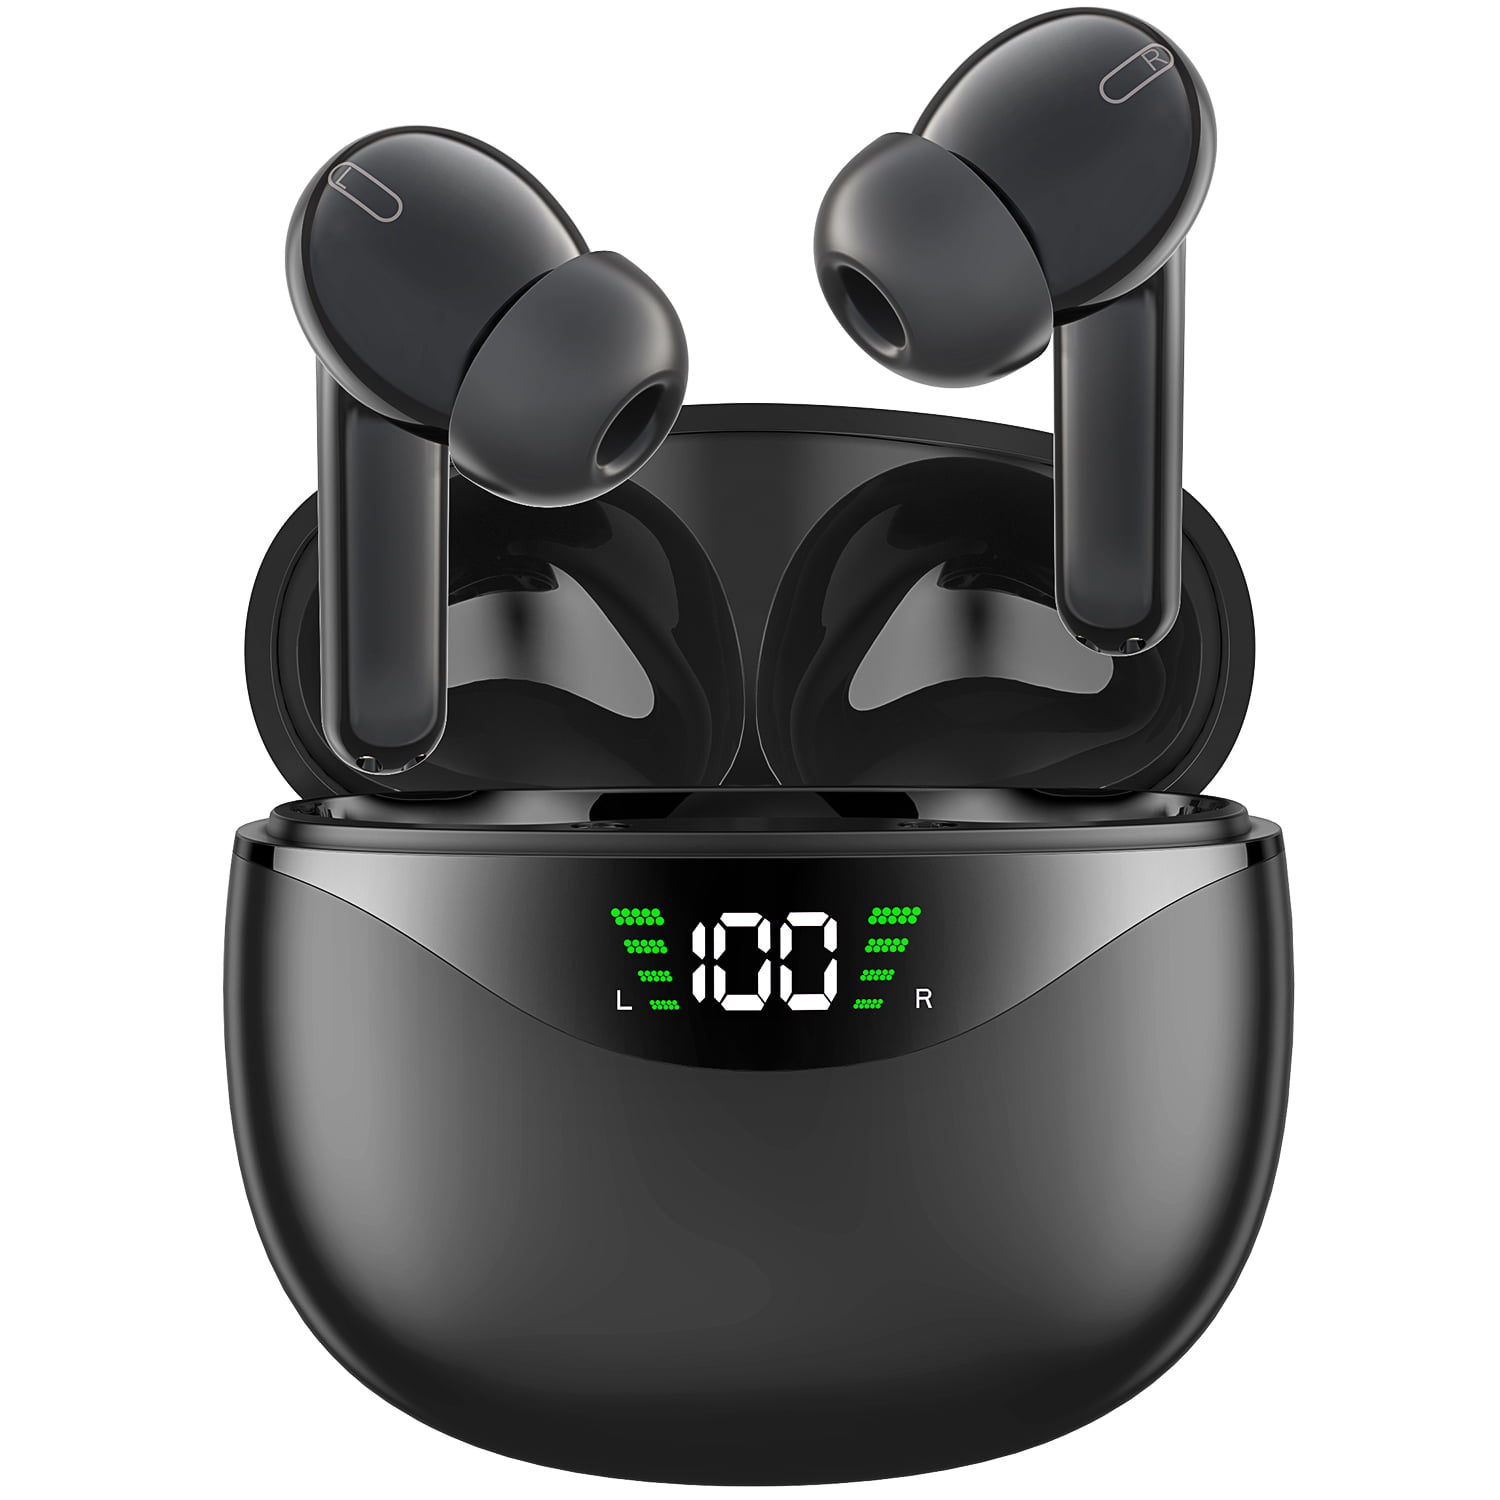 Wireless Earbuds, Bluetooth 5.1 Headphone 30Hrs Playtime with USB-C Fast Charging IPX7 Waterproof TWS Ear Stereo Headset Built-in Mic for iphone/Android(Black) - Walmart.com